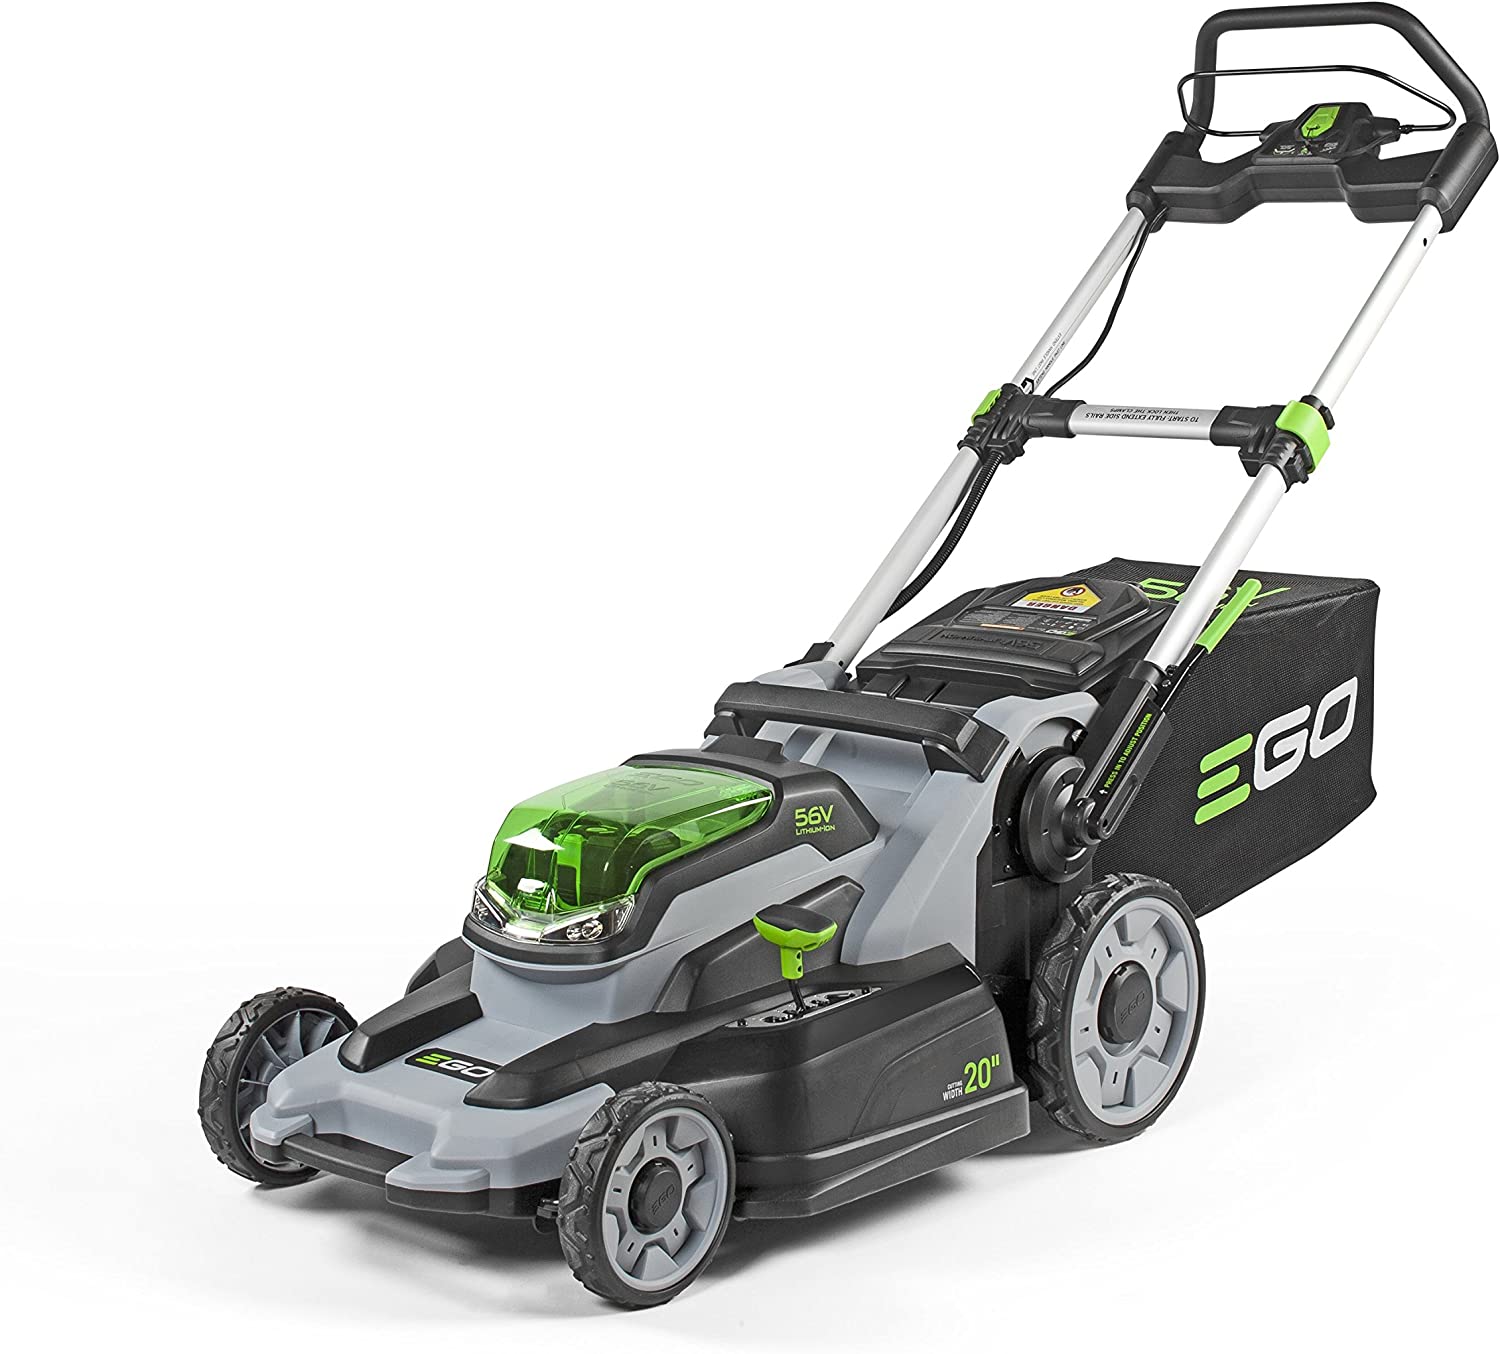 Top 10 Best Lawn Mower For Small Yard Of 2020